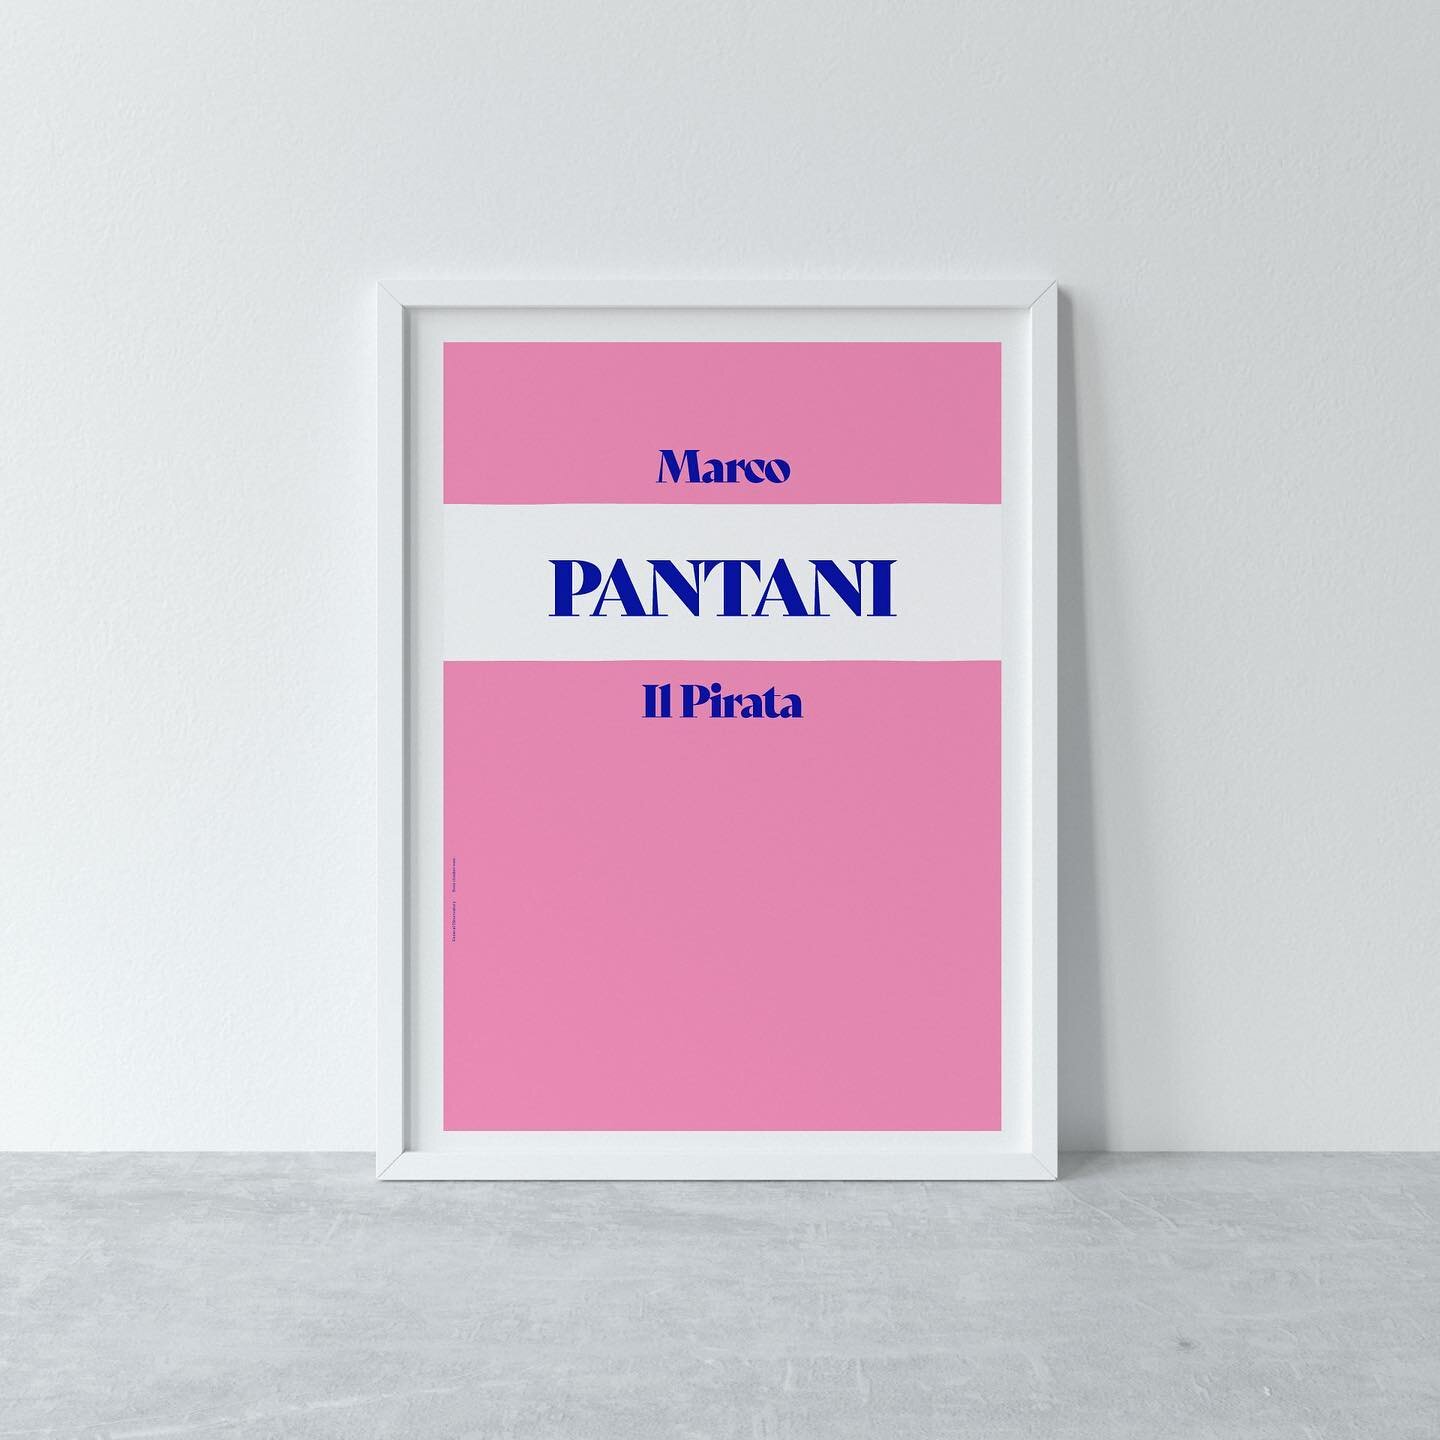 Homage to the late great Pantani. This is going to be a limited edition Giclee printed on 300gsm A2. 
.
.
.
.
.
.
.
#cyclinghomage #pink #cyclingtype #cyclinglife #cyclingart #interiorart #moderninterior #posterart #posterdesign #graphicart #pinkandb